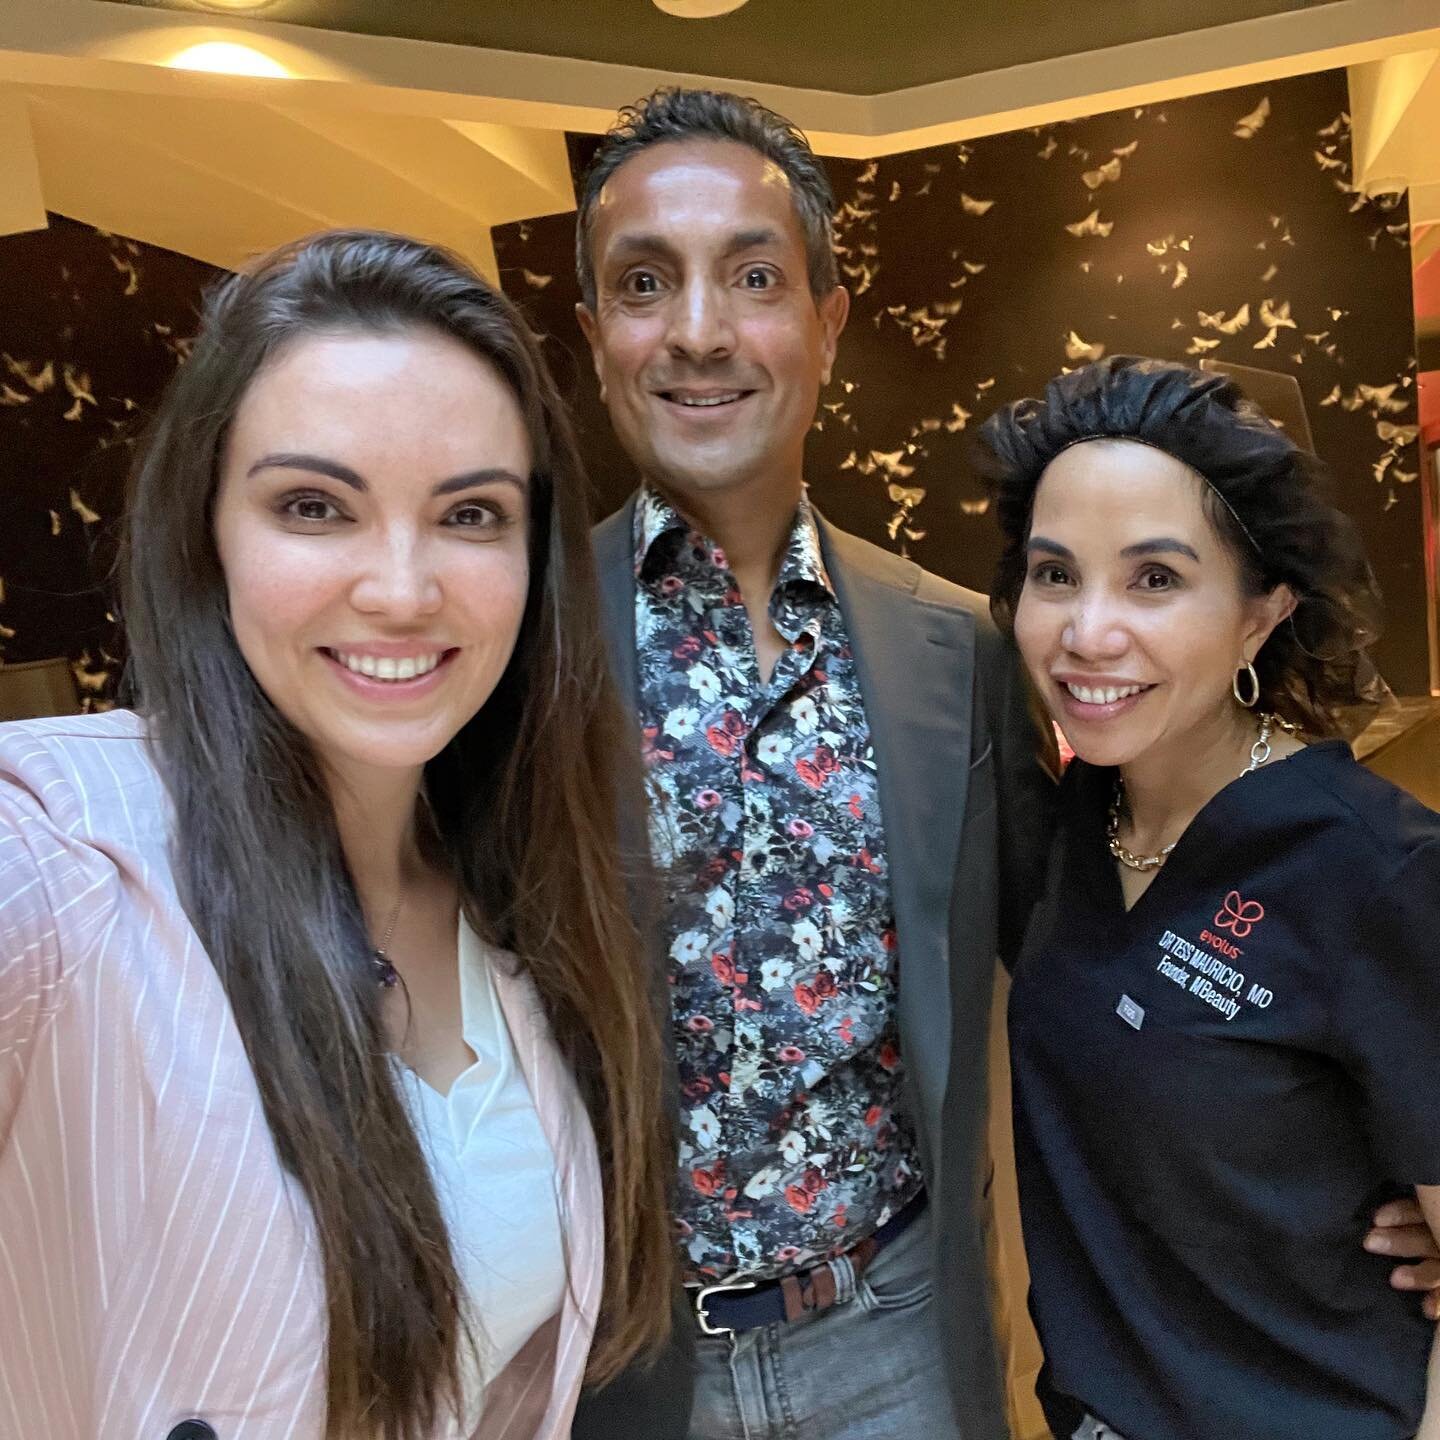 Meet two of my dearest friends who are also board members of @theoneheartmovement.  They are incredible leaders doing amazing things in the world.  @themr.rk is CEO of PowerTap, a groundbreaking hydrogen company; @drtessmauricio is leading the way in